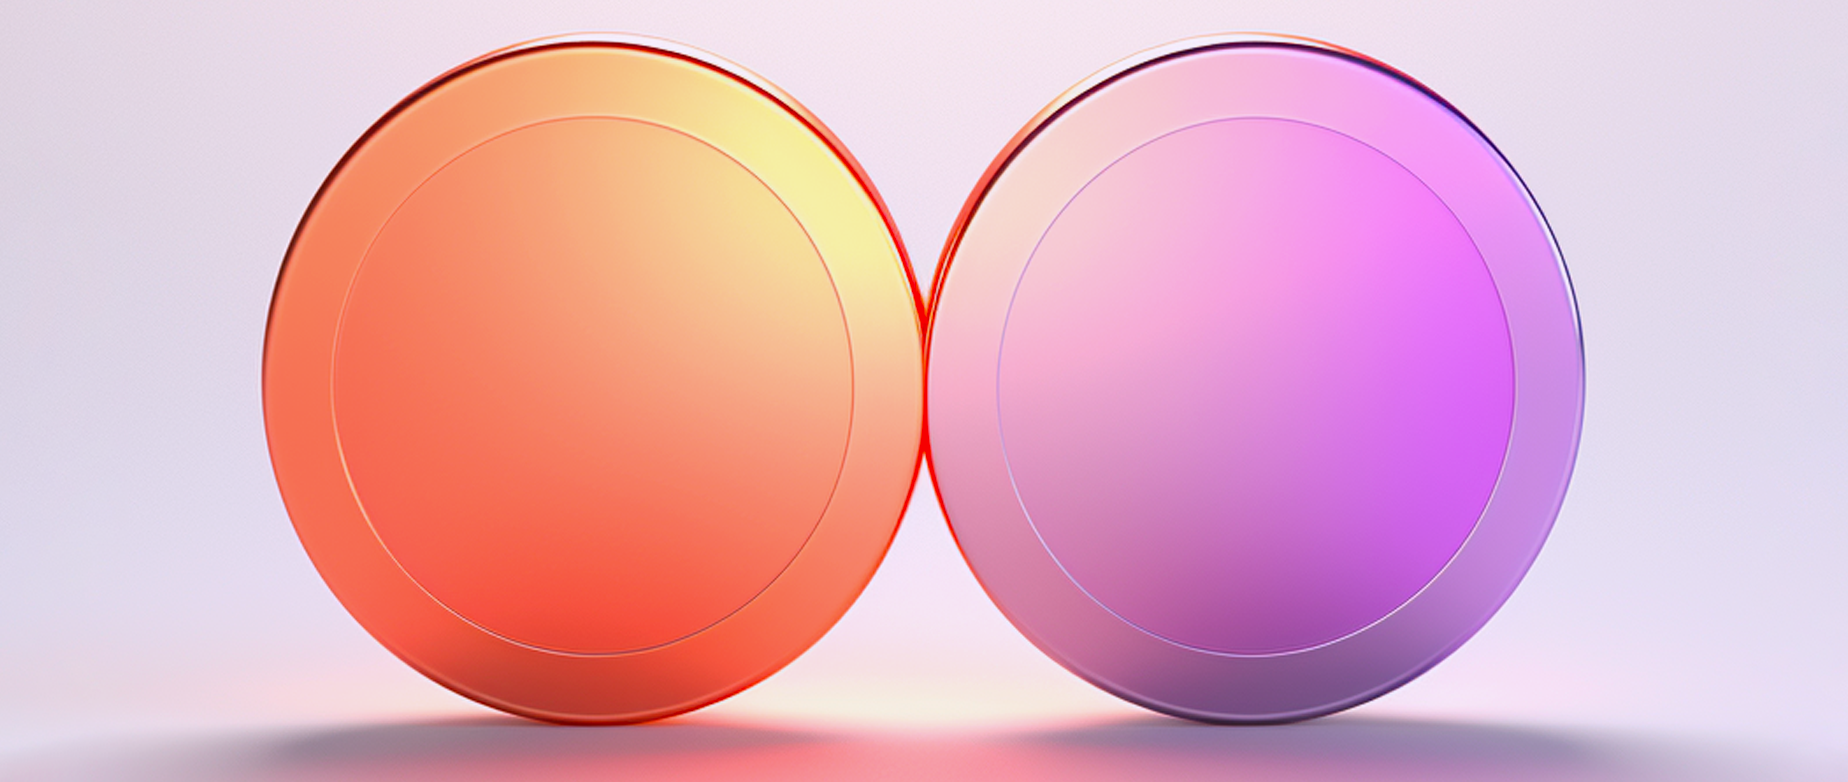 Illustration of two touching bubbles representing the concept of a partnership